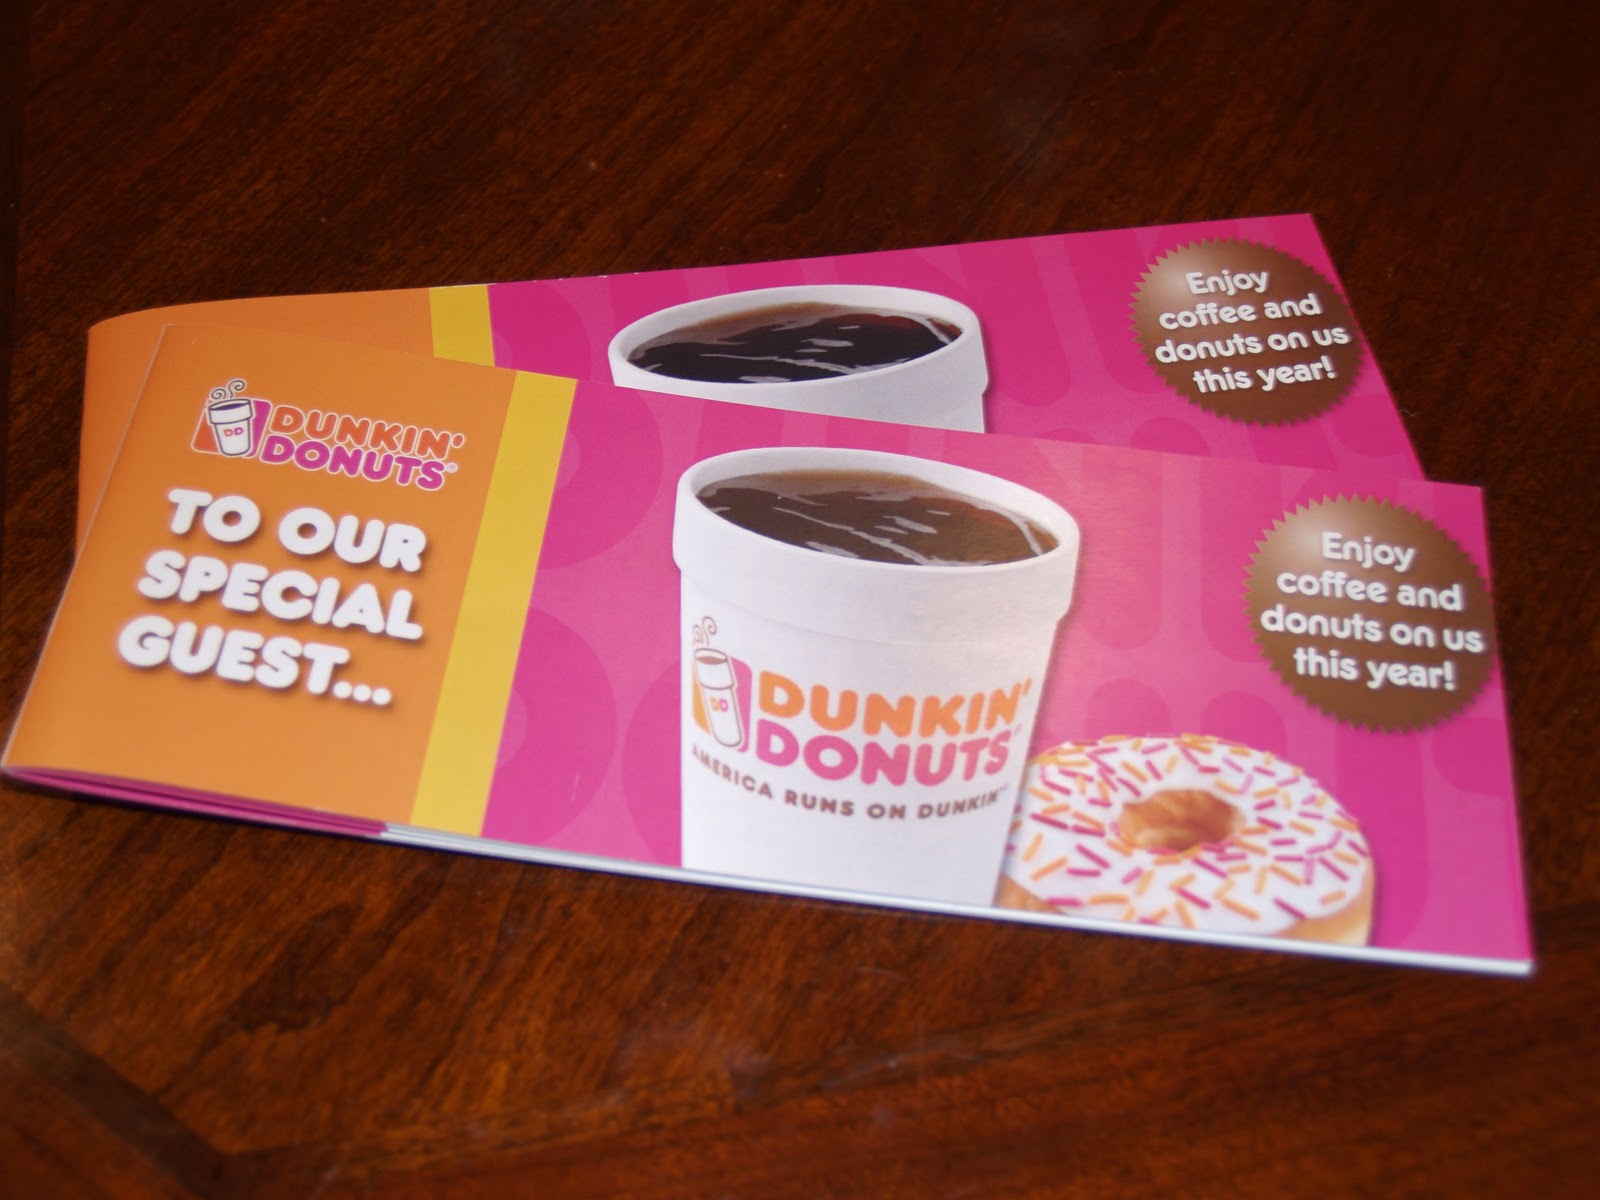 Dunkin Donuts Coffee Coupons 2012